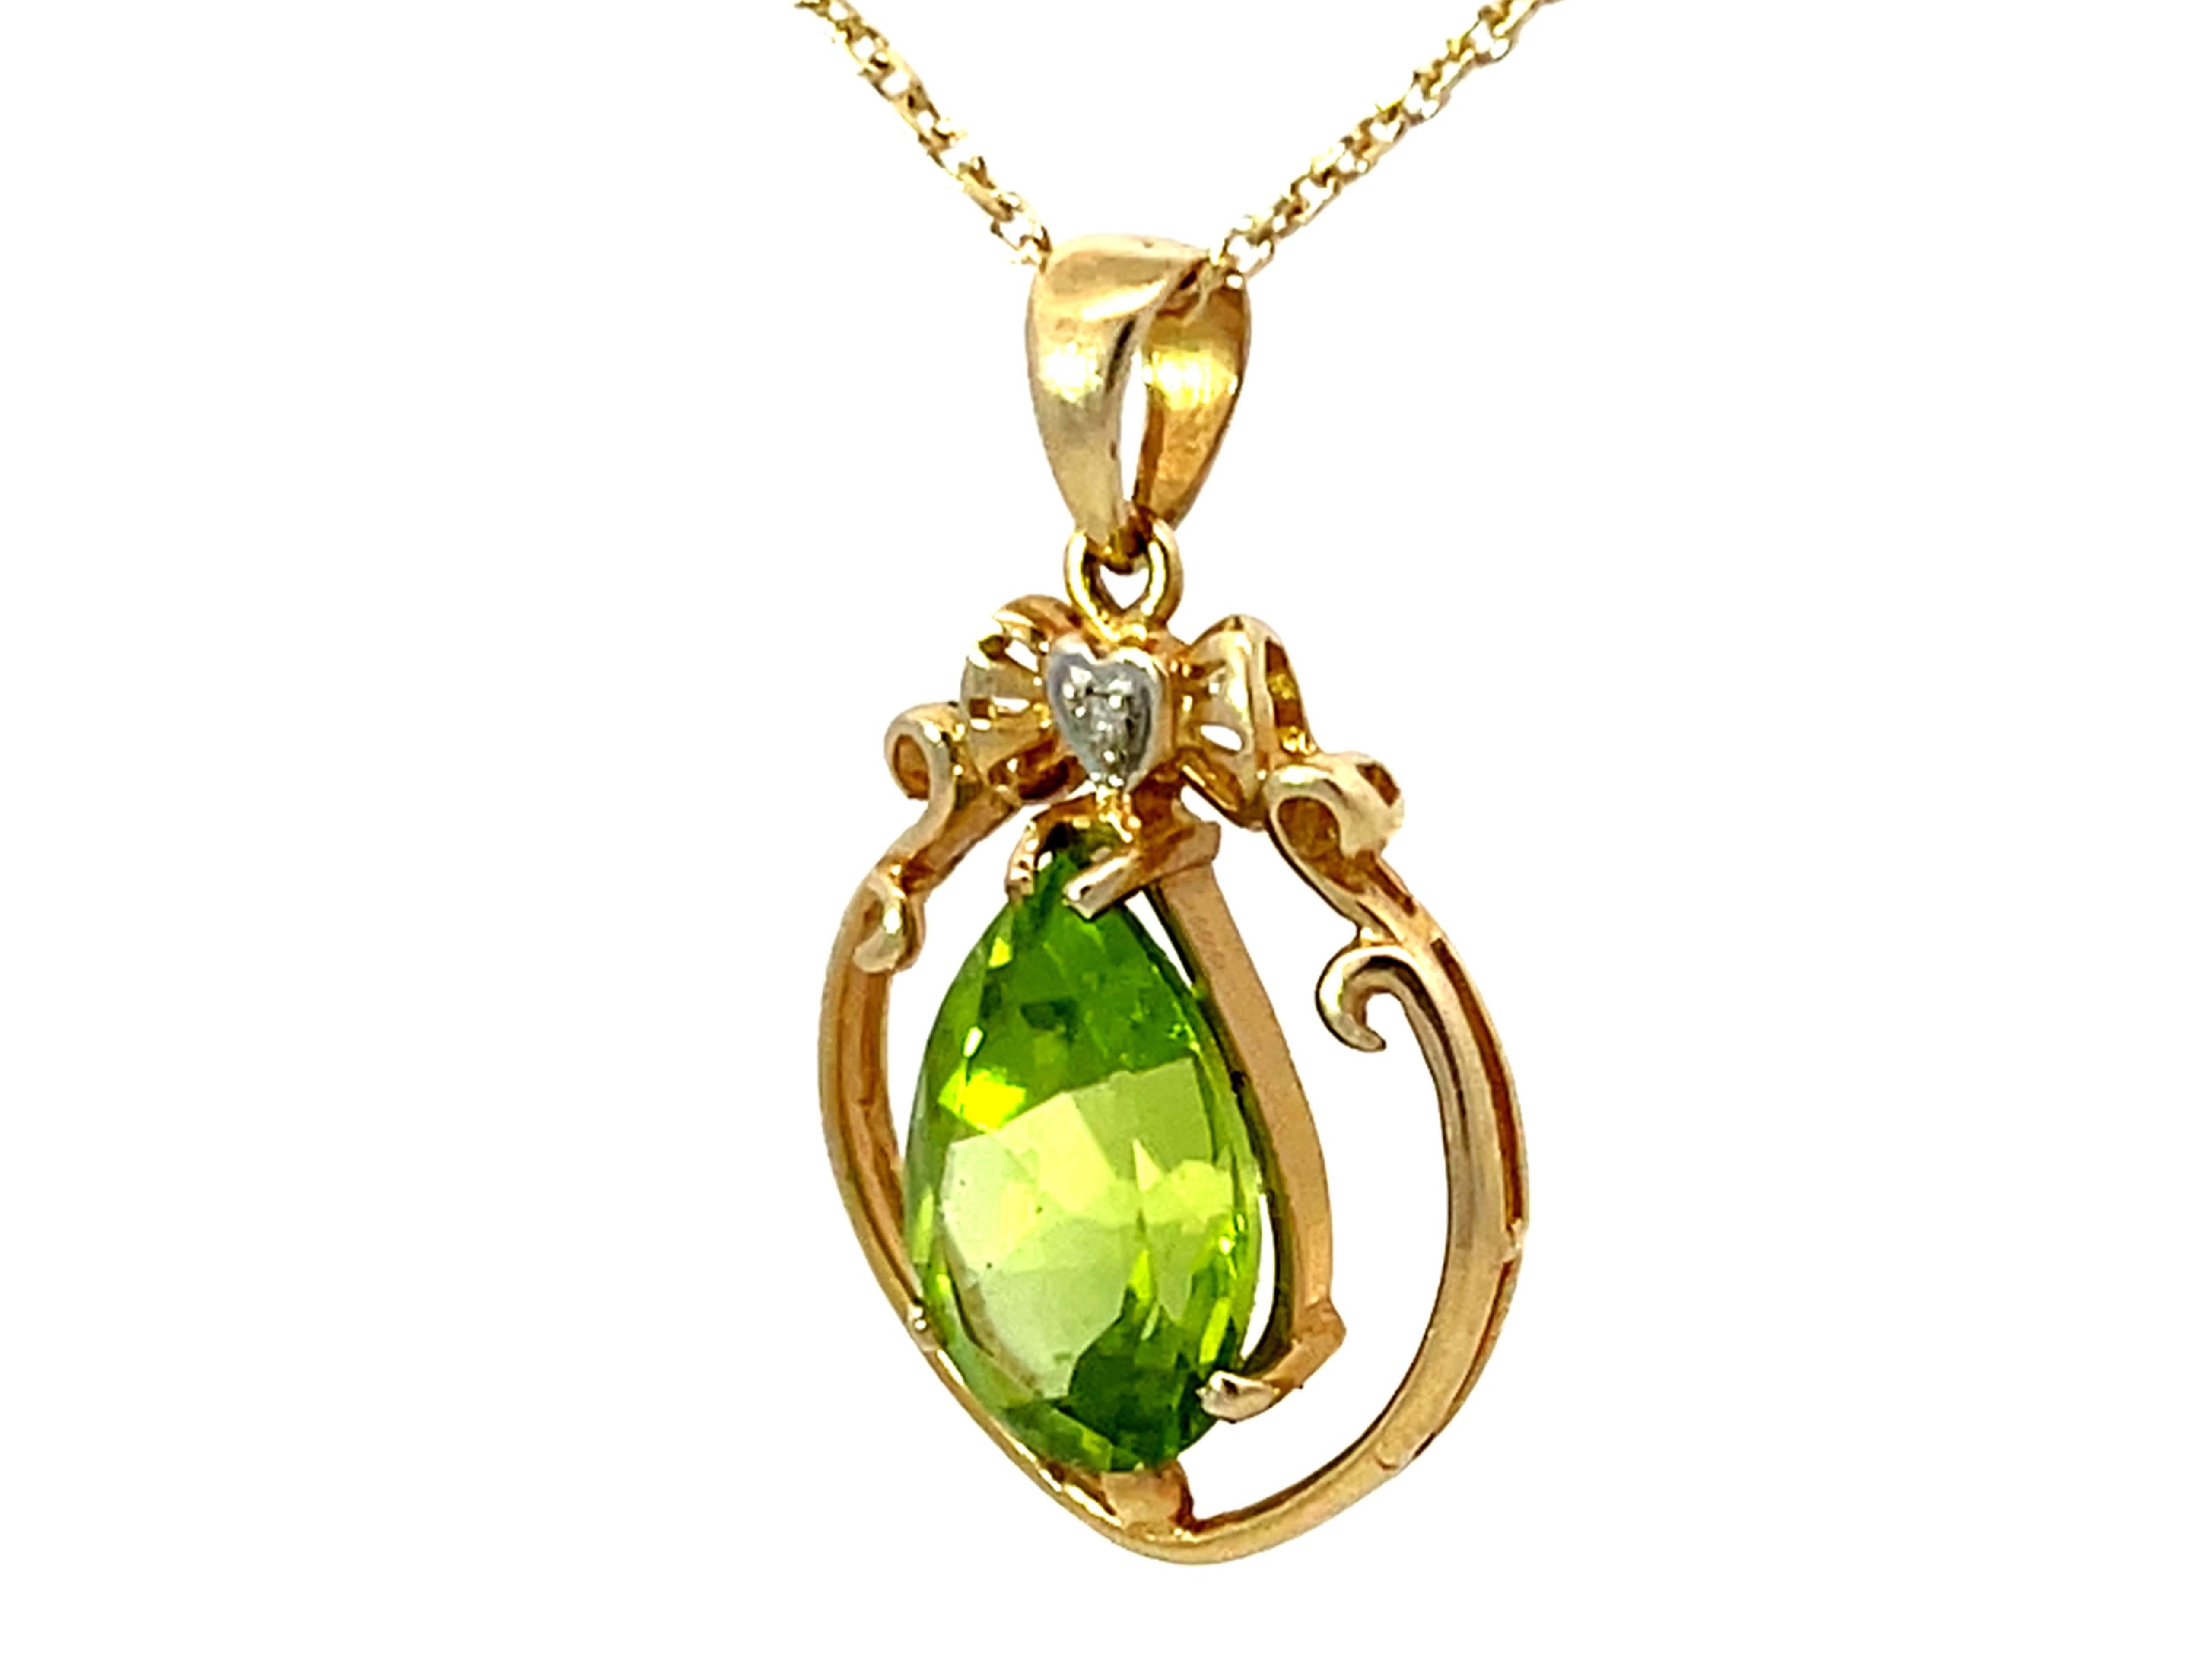 Pear Cut Peridot Diamond Solid 14K Yellow Gold Pendant Necklace For Sale